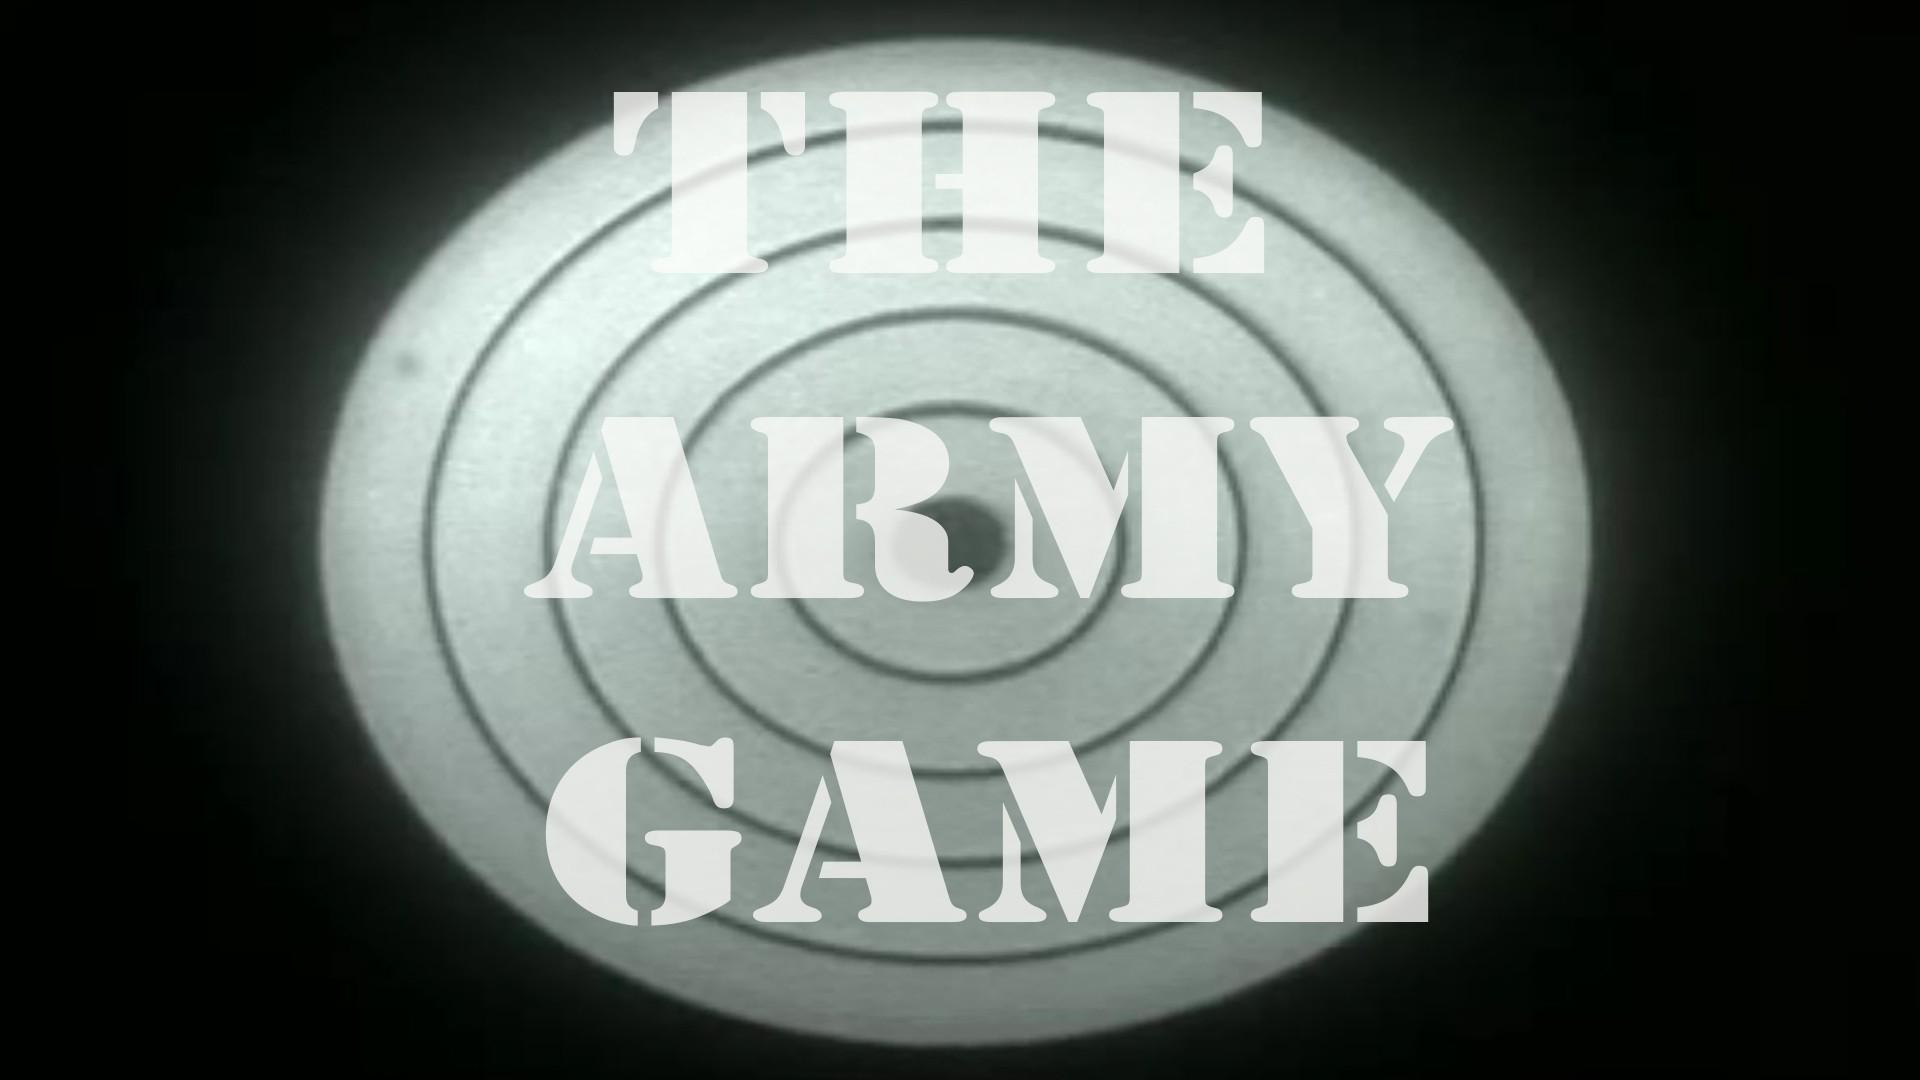 The Army Game